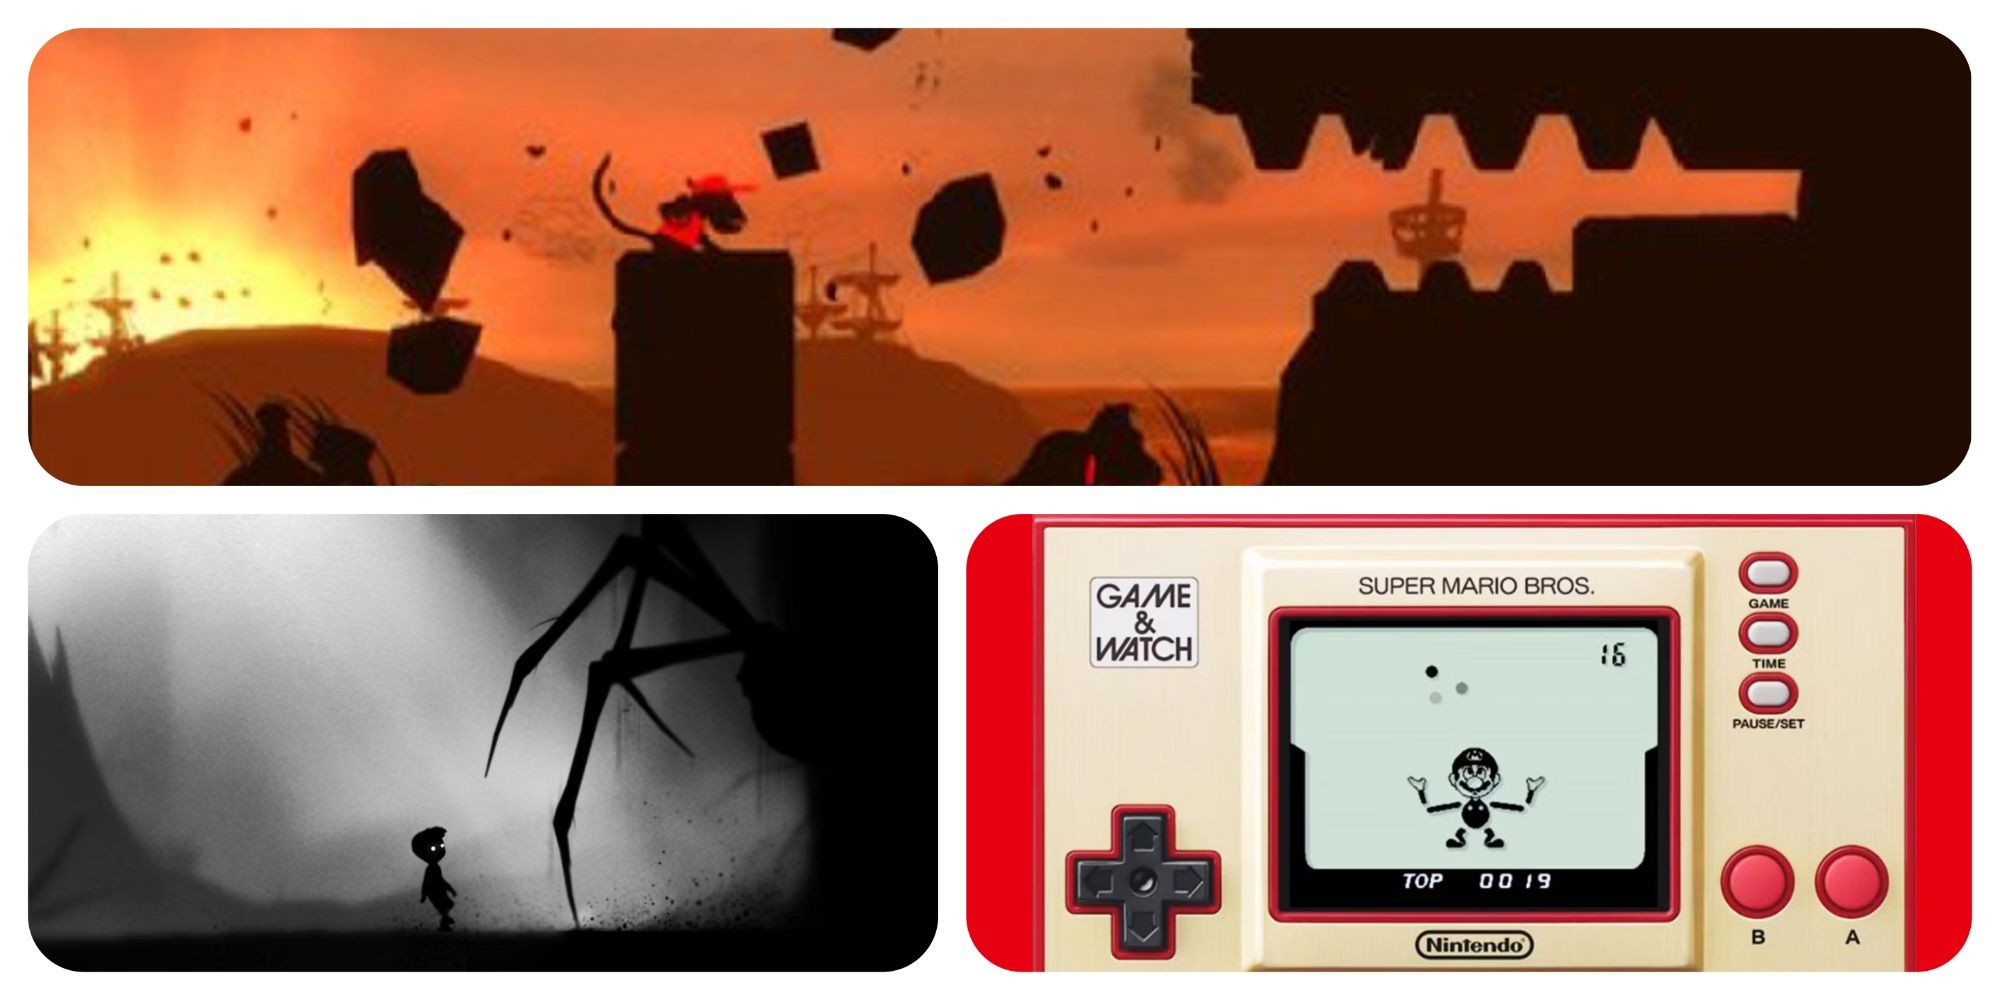 Top: Silhouette level of Donkey Kong Country Returns. Bottom-Left: A boy facing a giant spider in Limbo. Bottom-Right: A Super Mario Bros. Game and Watch with a Mario silhouette juggling balls.